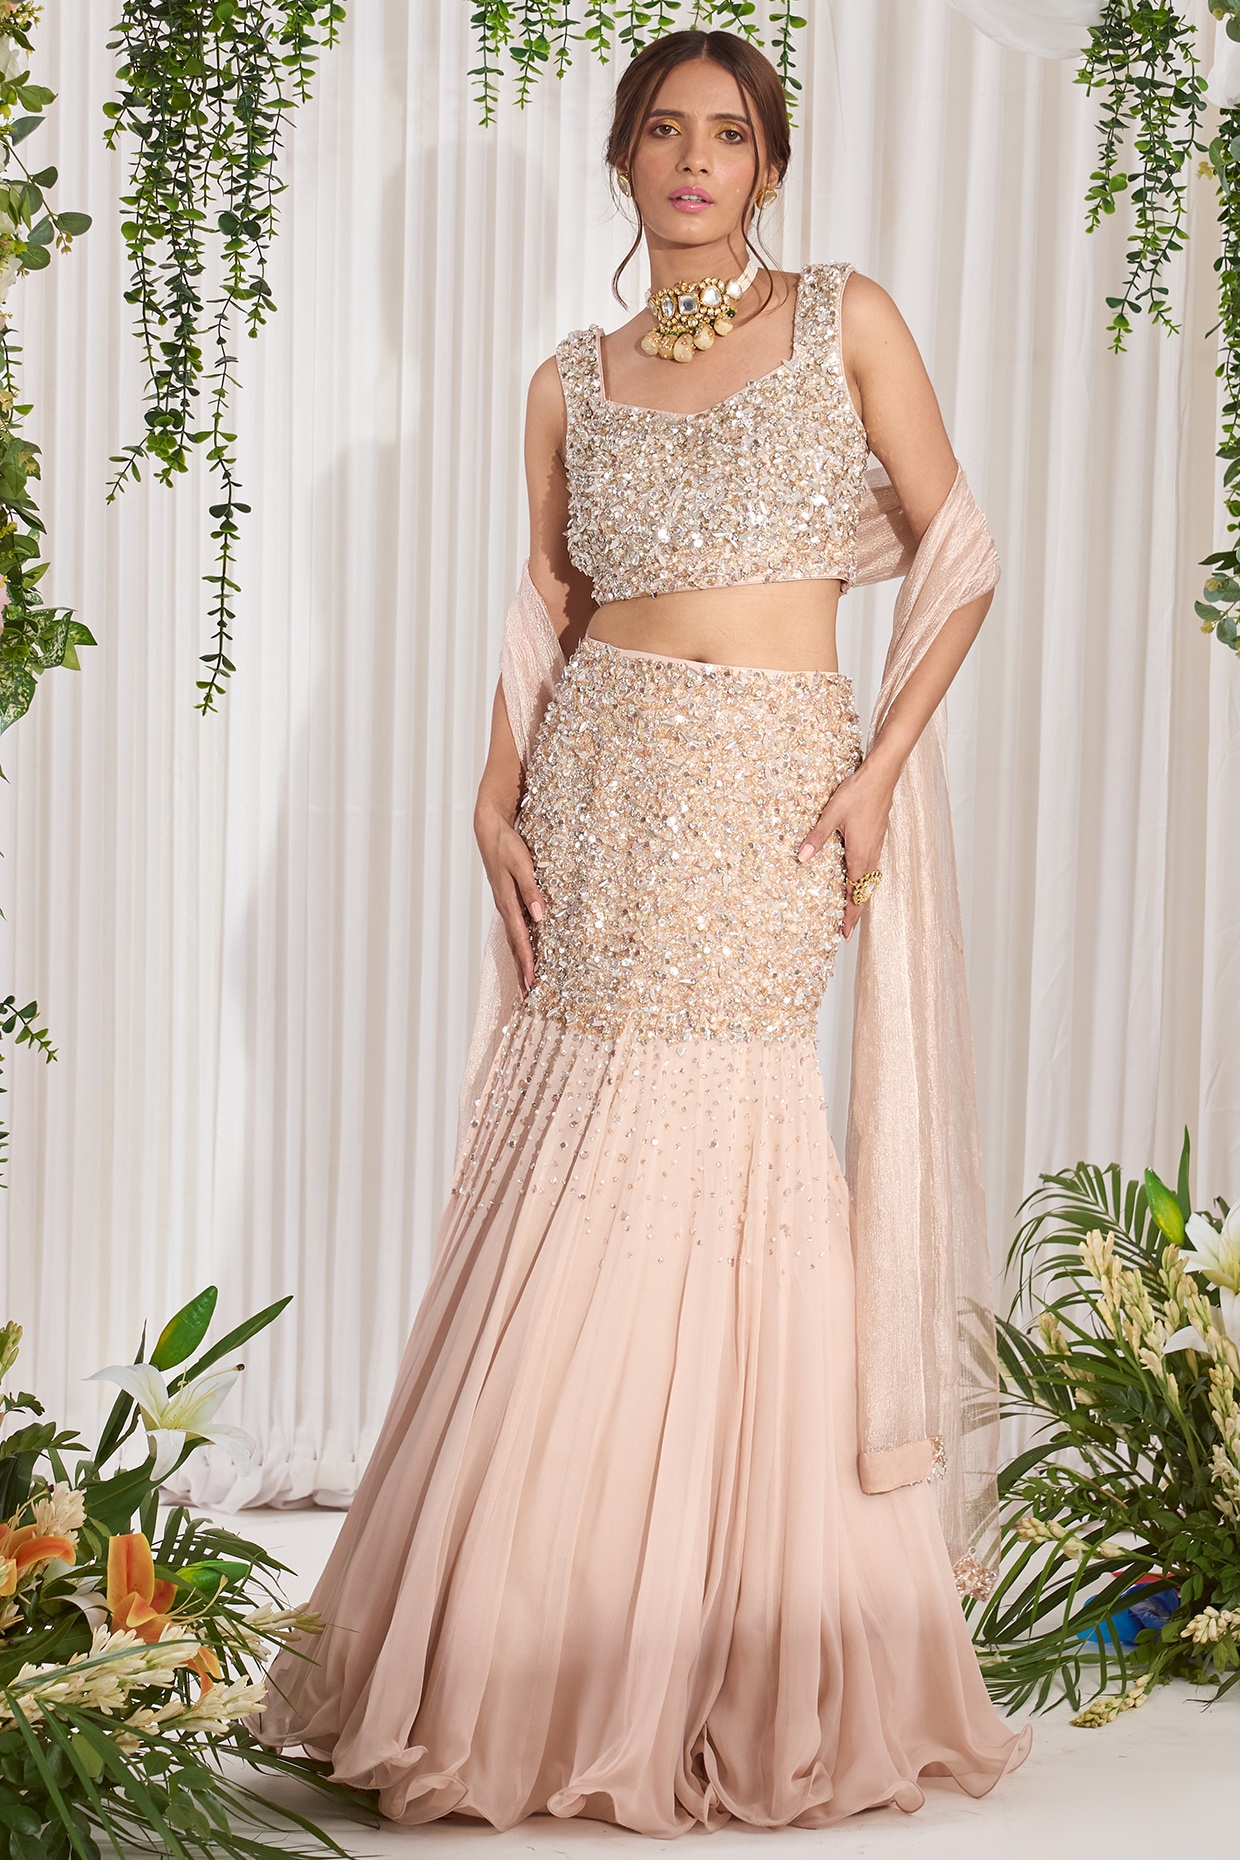 Cinammon embroidered lehenga and organza blouse by Seema Gujral Design